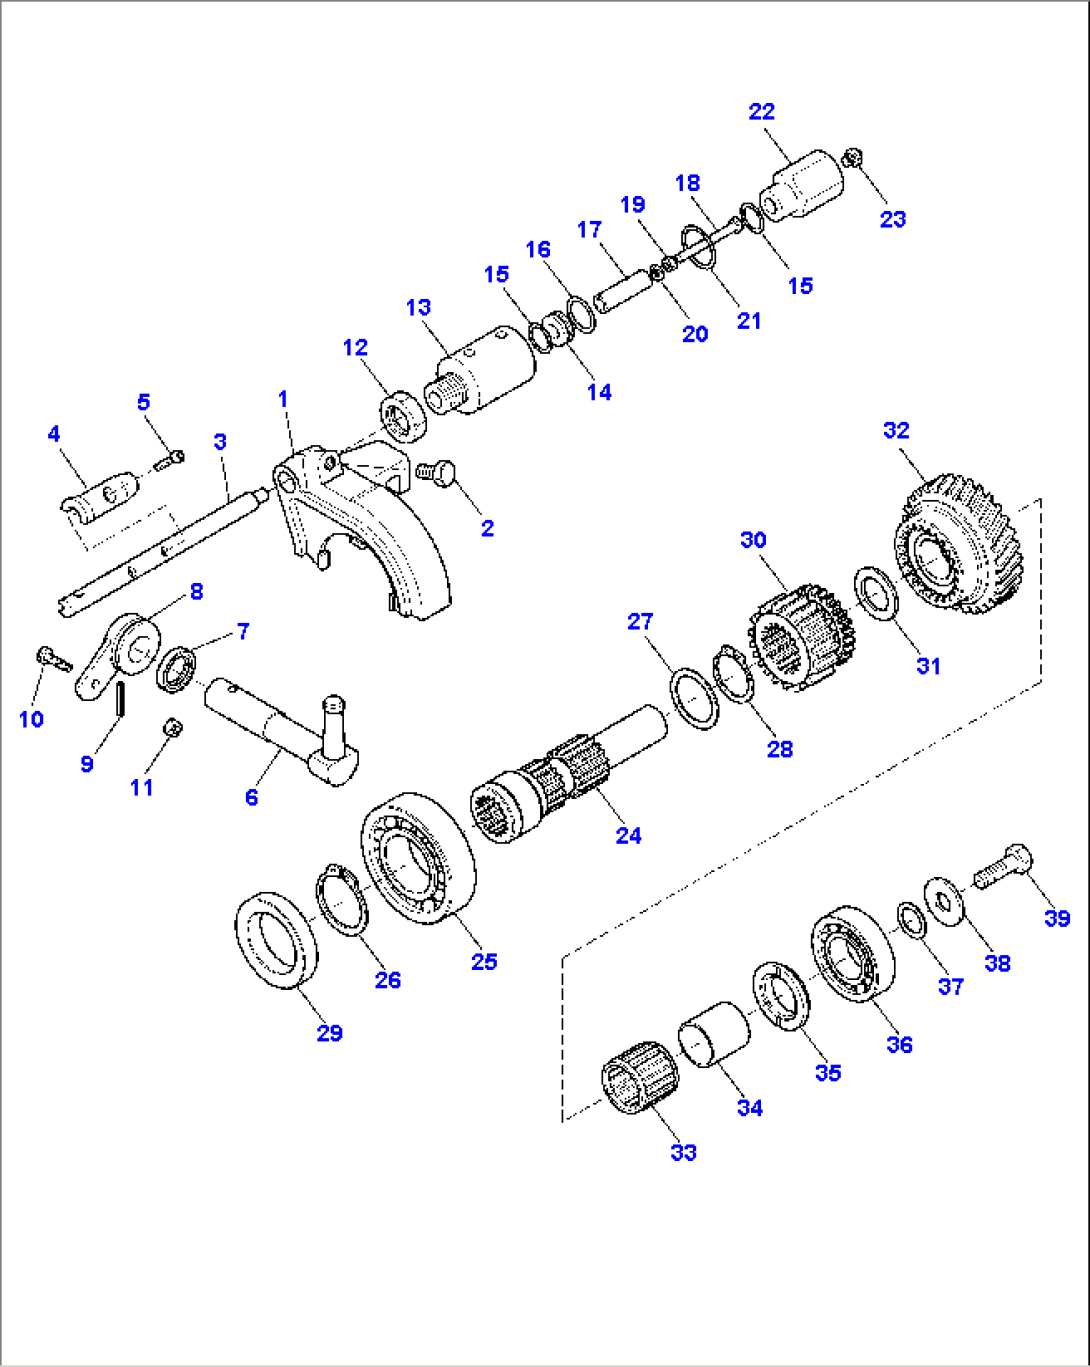 FRONT AXLE (2/9)